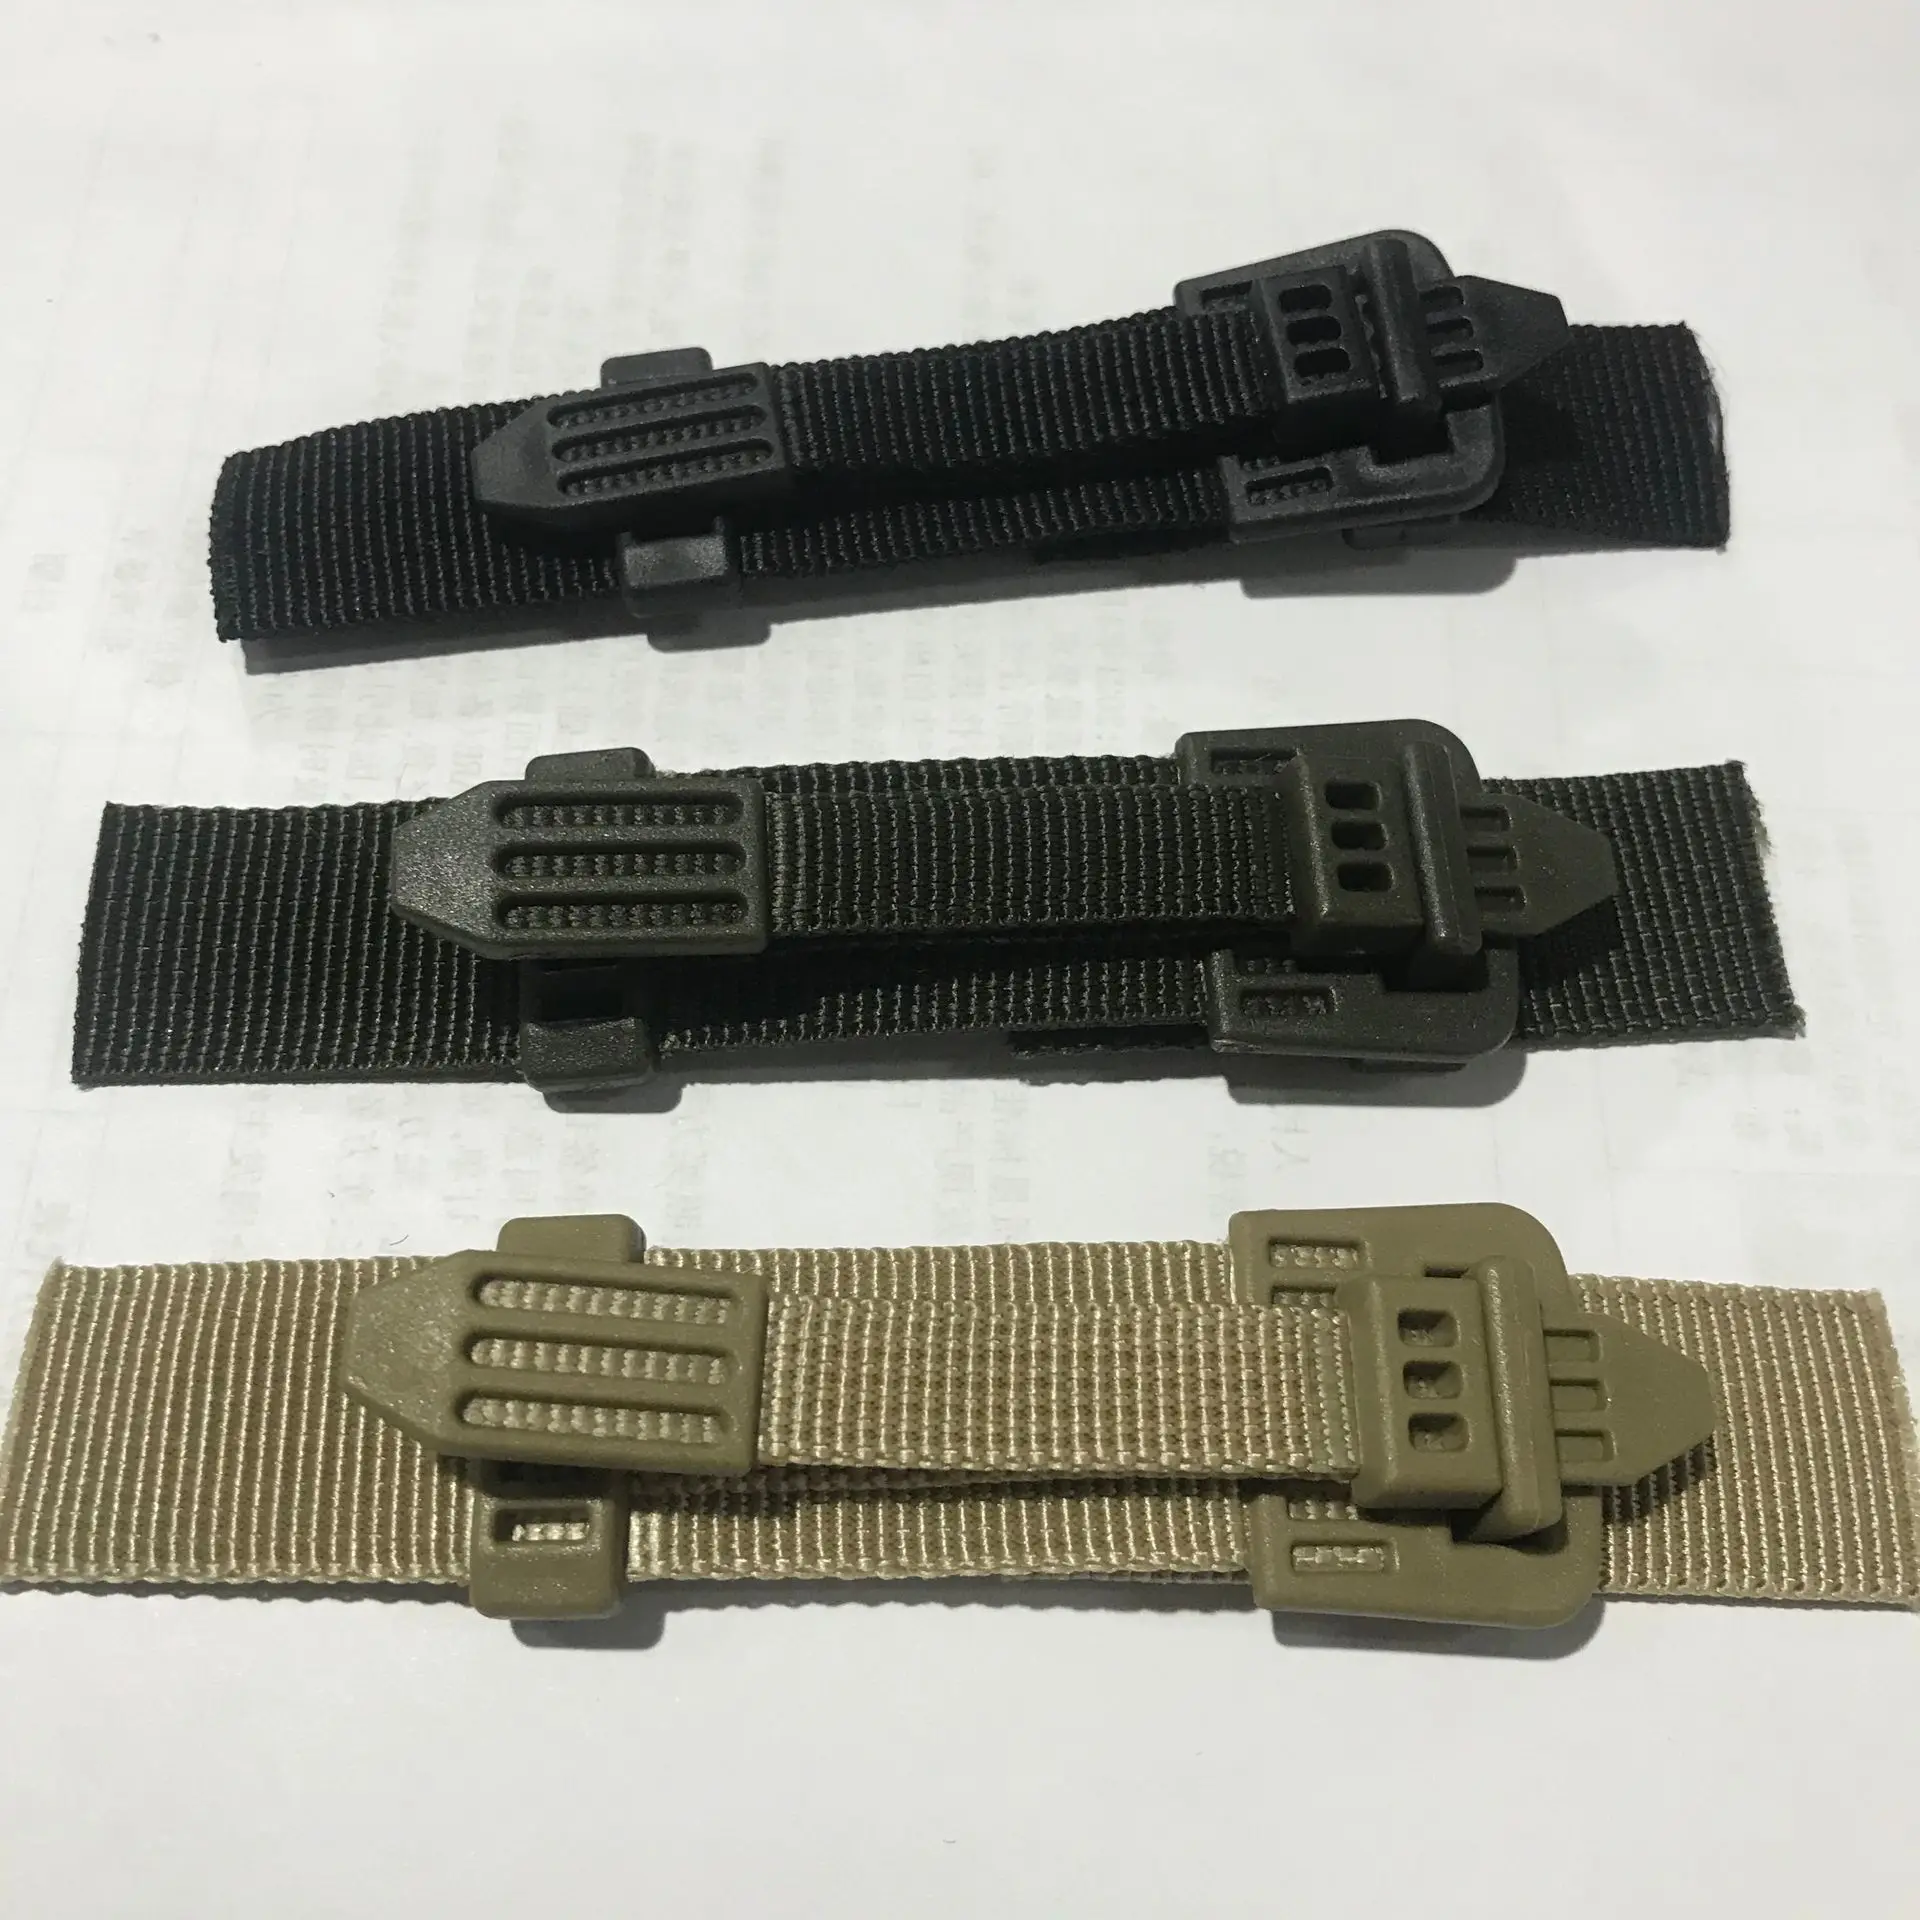 

Spanish quick release set Buckle MOLLE Minimi spanish Pouch strap buckle attachment MTP MOLLE motocross riding gear buckle